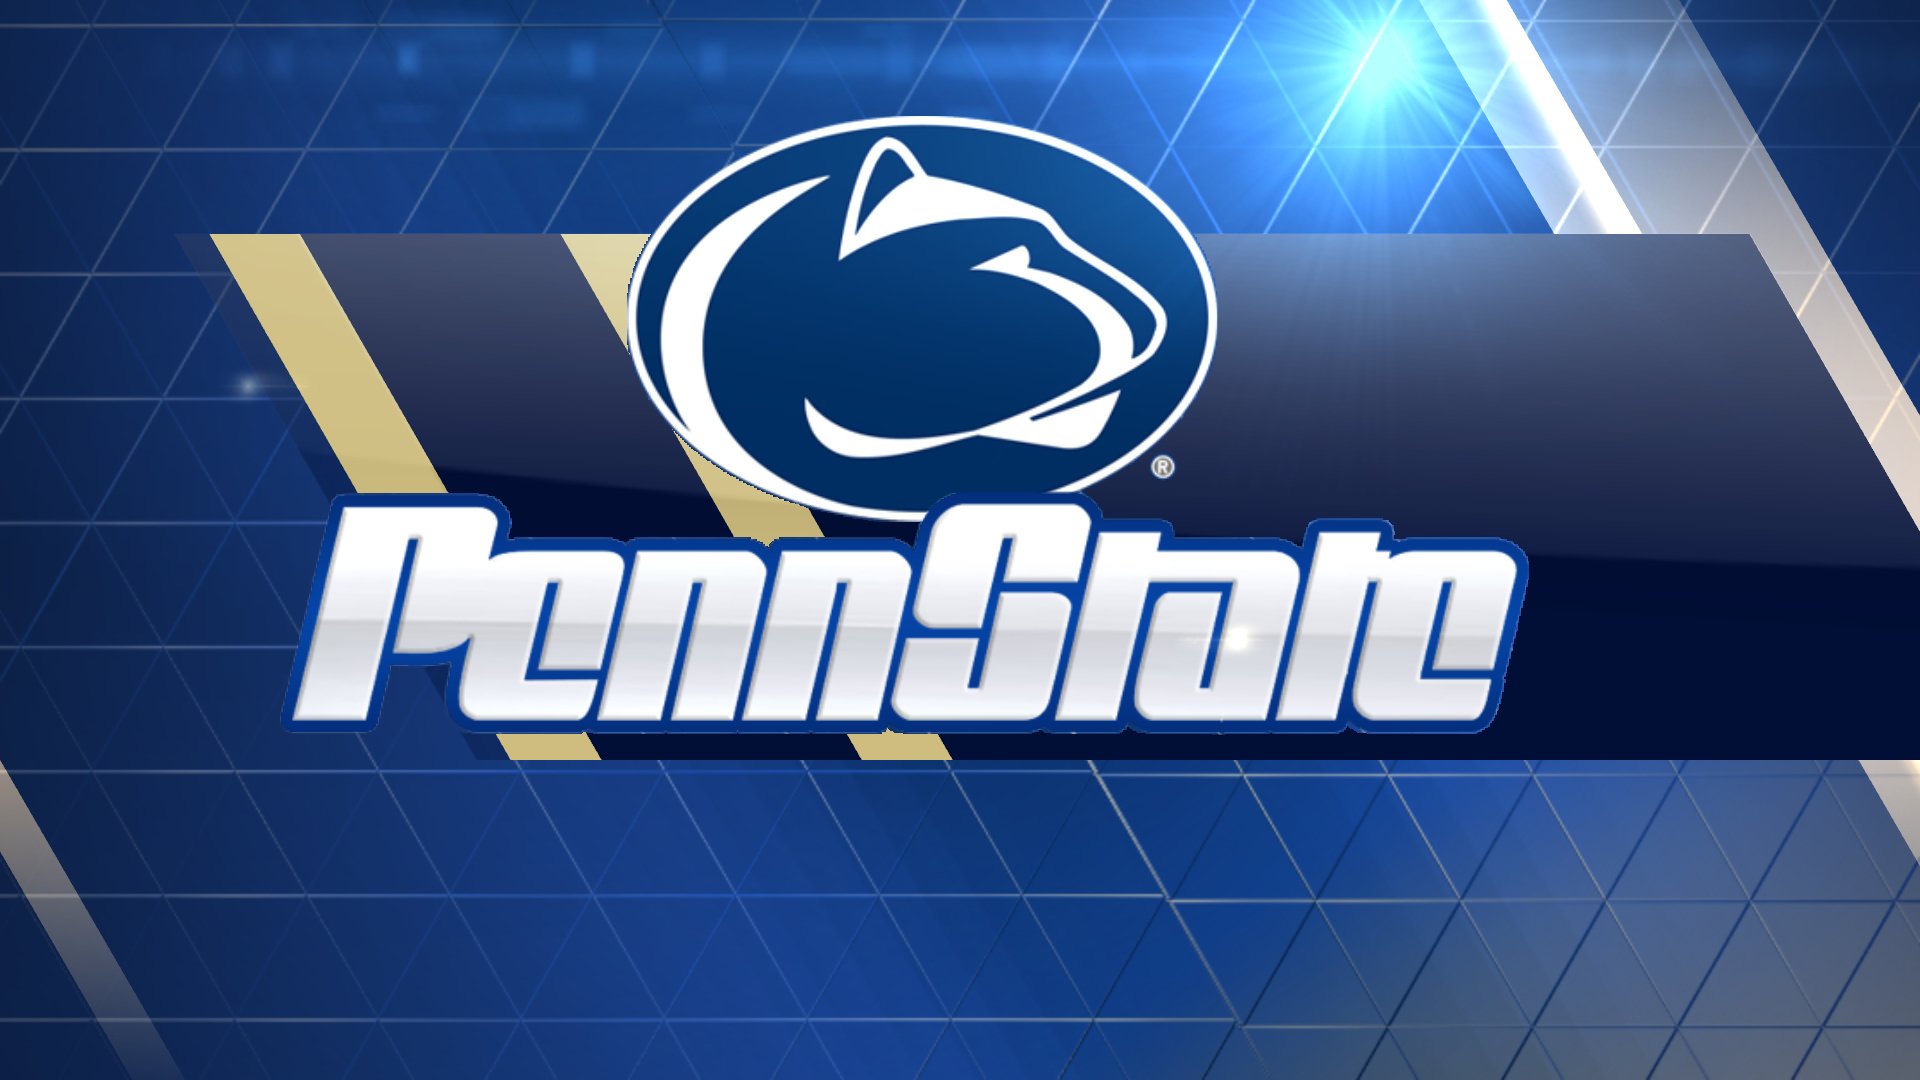 Penn State Nittany Lions College Football Wallpaper